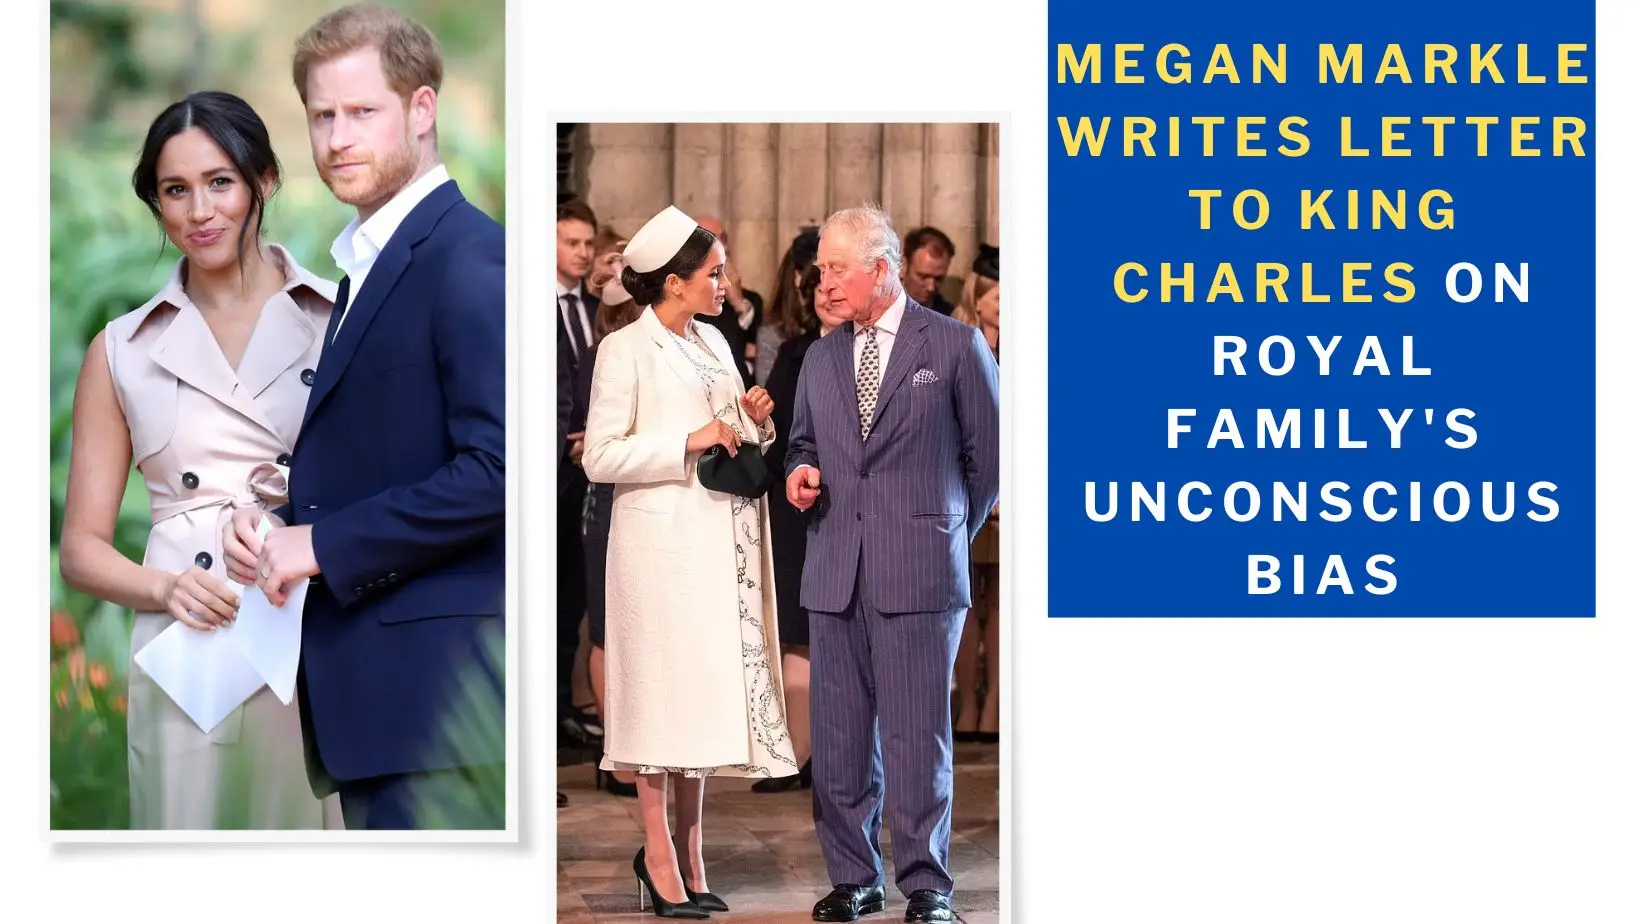 Megan Markle Writes Letter to King Charles on Royal Family's Unconscious Bias (image credit: dailymail)